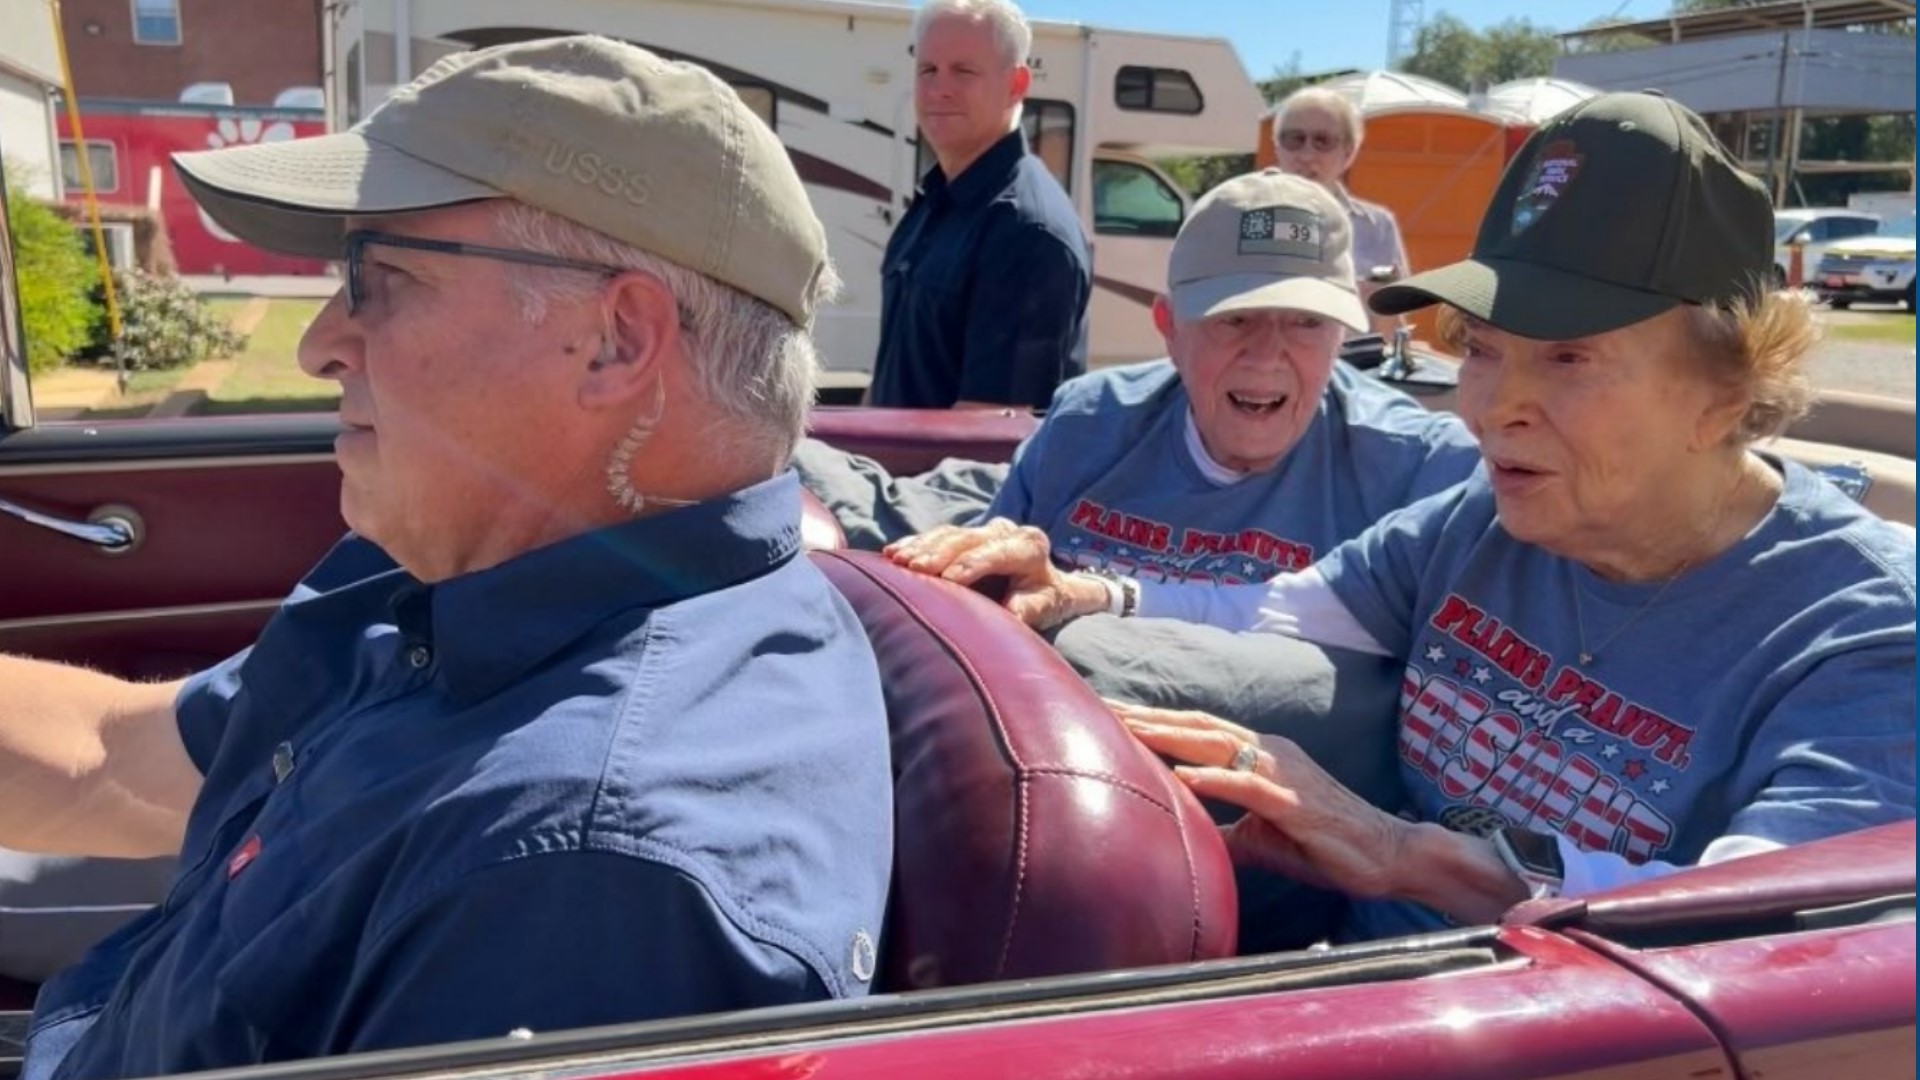 The two could be seen riding in a shiny red 1946 Ford Super Deluxe convertible, which was a surprise 75th anniversary gift.